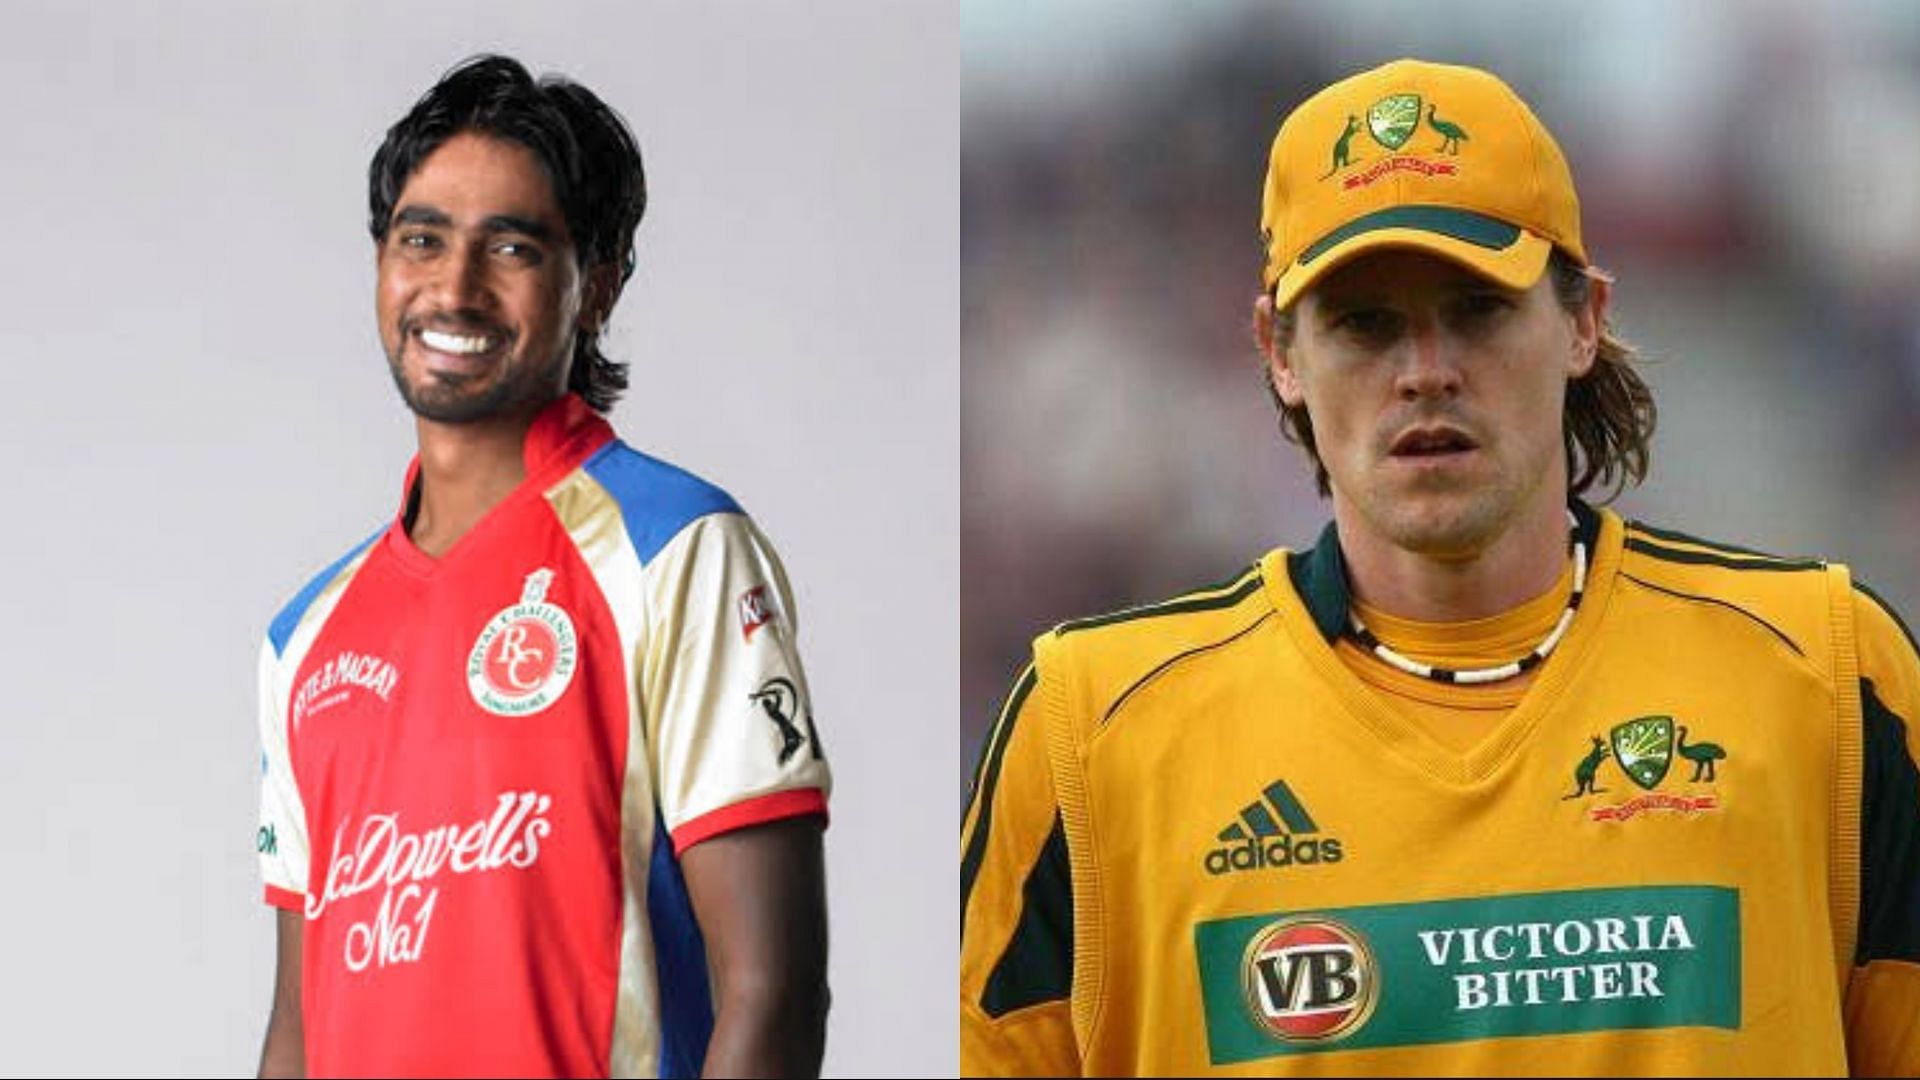 Overseas fast bowlers Nuwan Pradeep and Nathan Bracken did not get a chance to play for RCB despite earning a contract from them